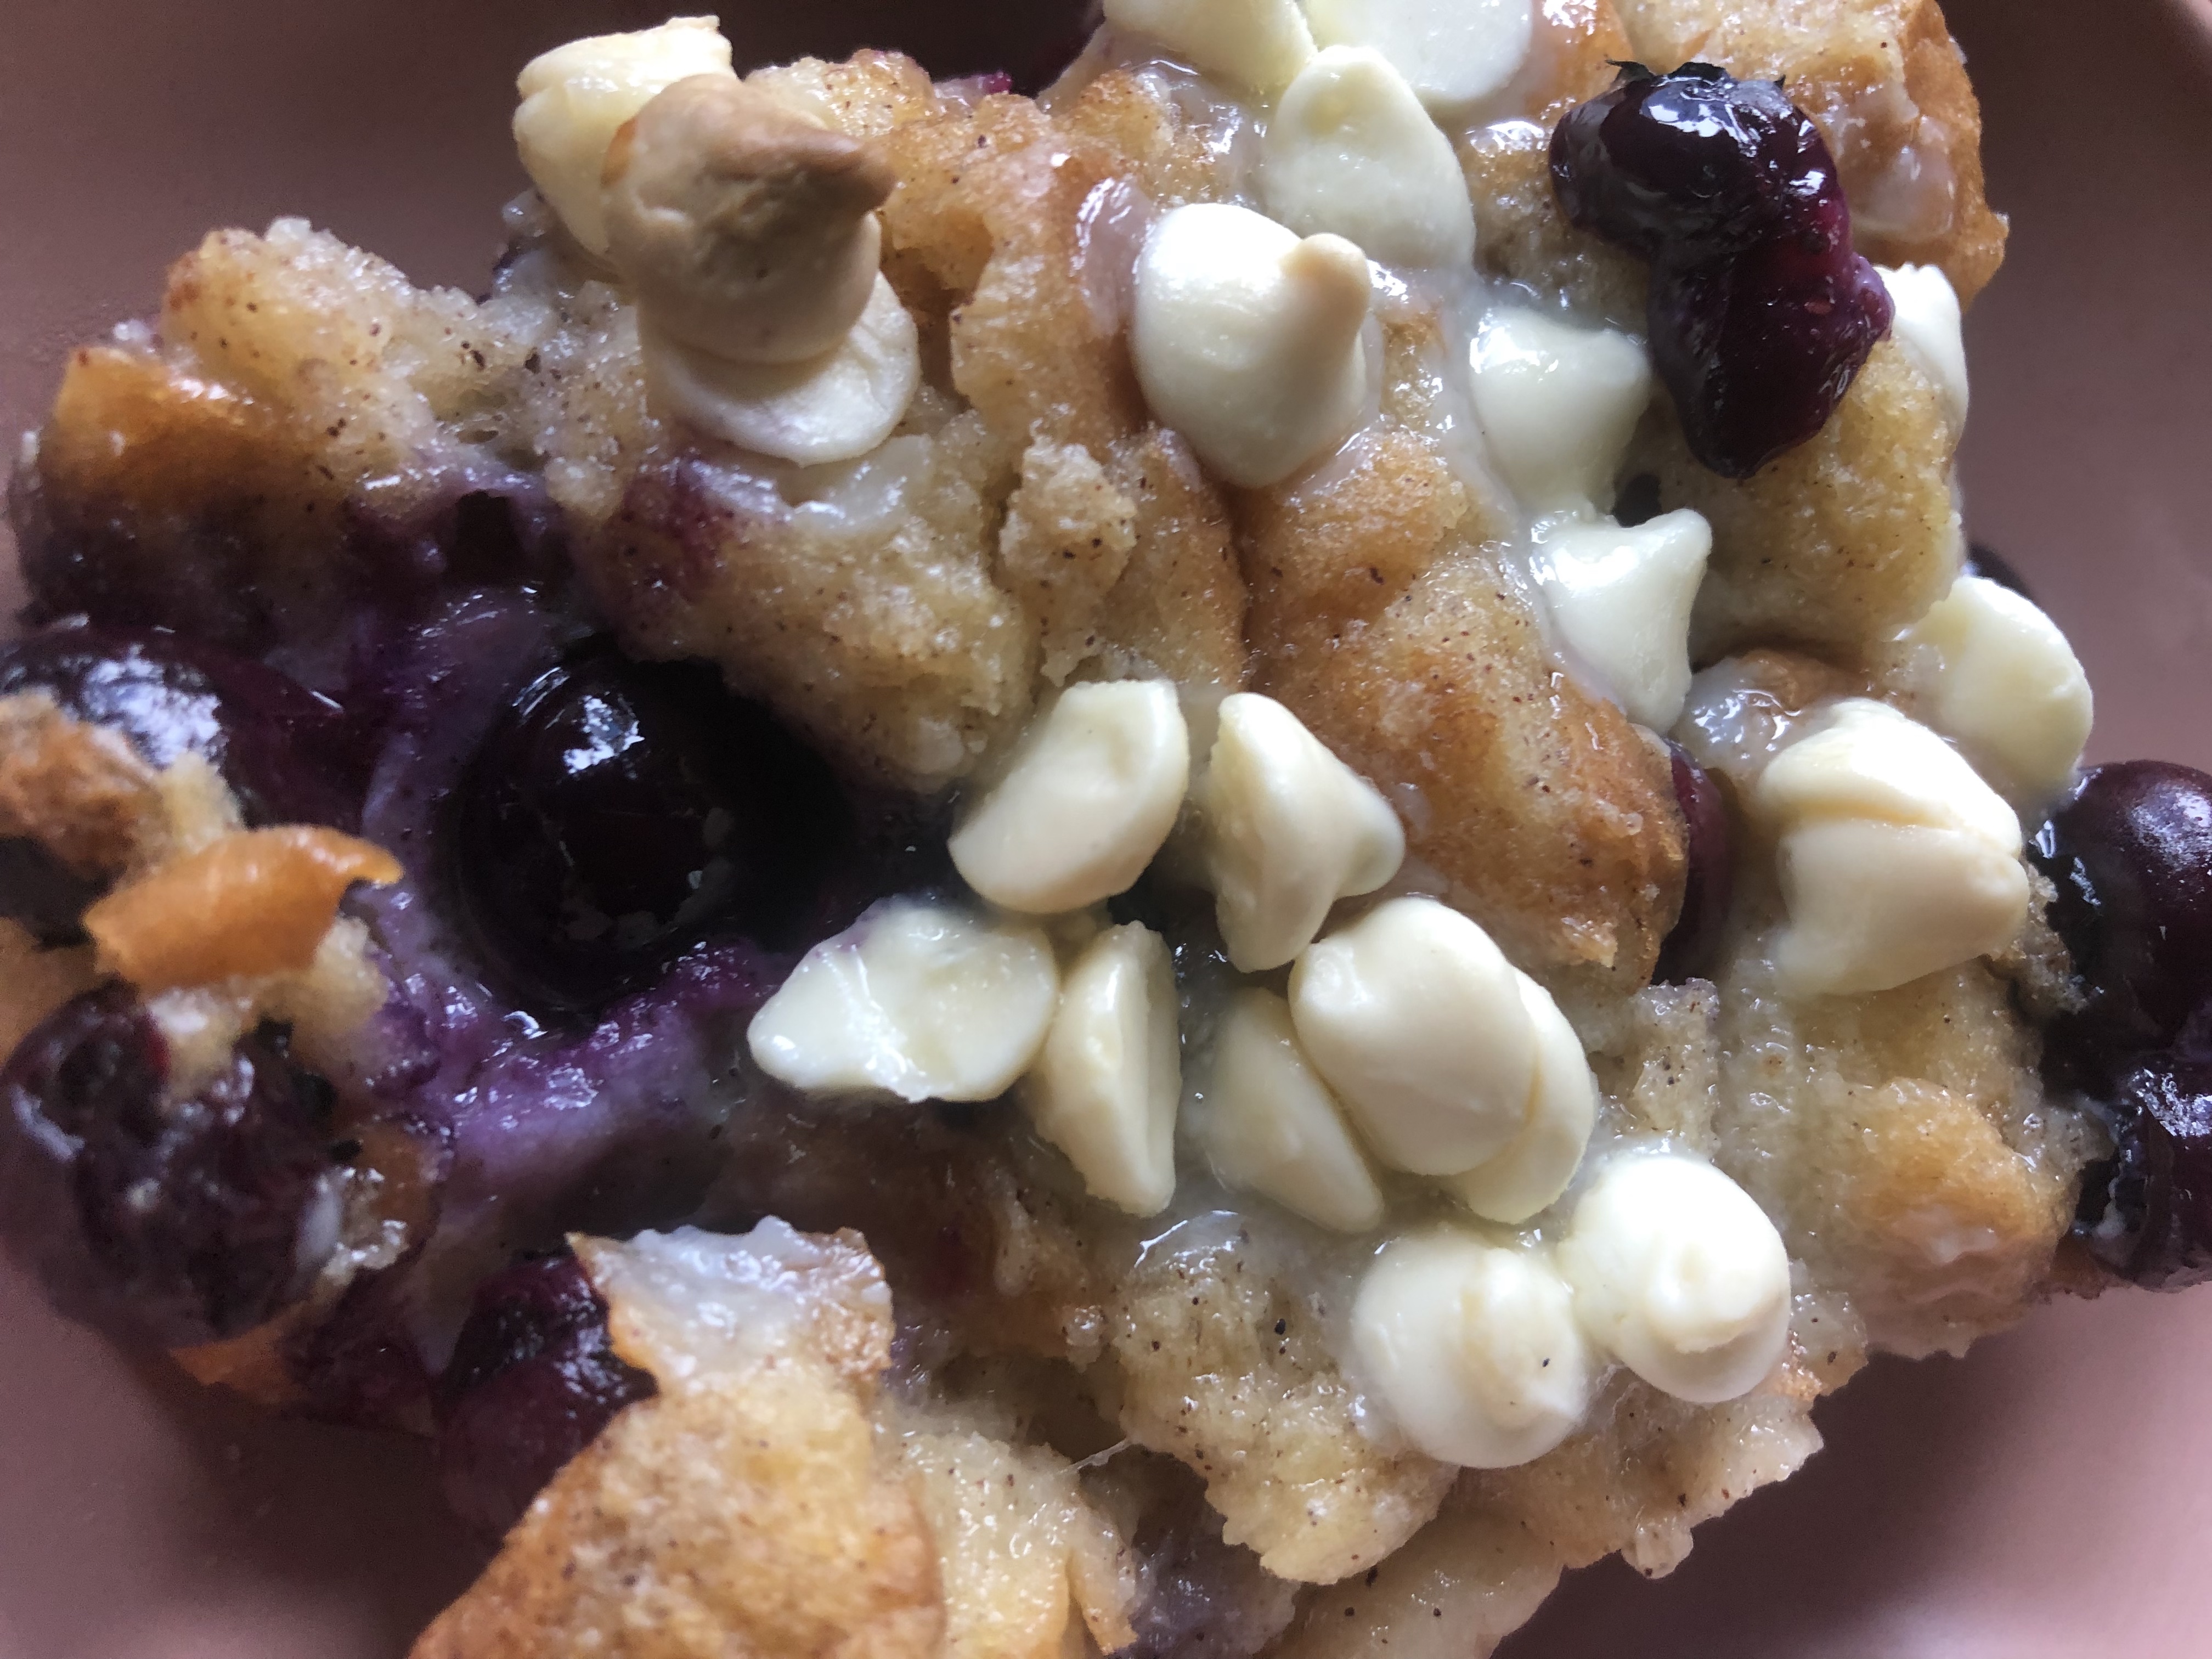 Blueberry Bread Pudding